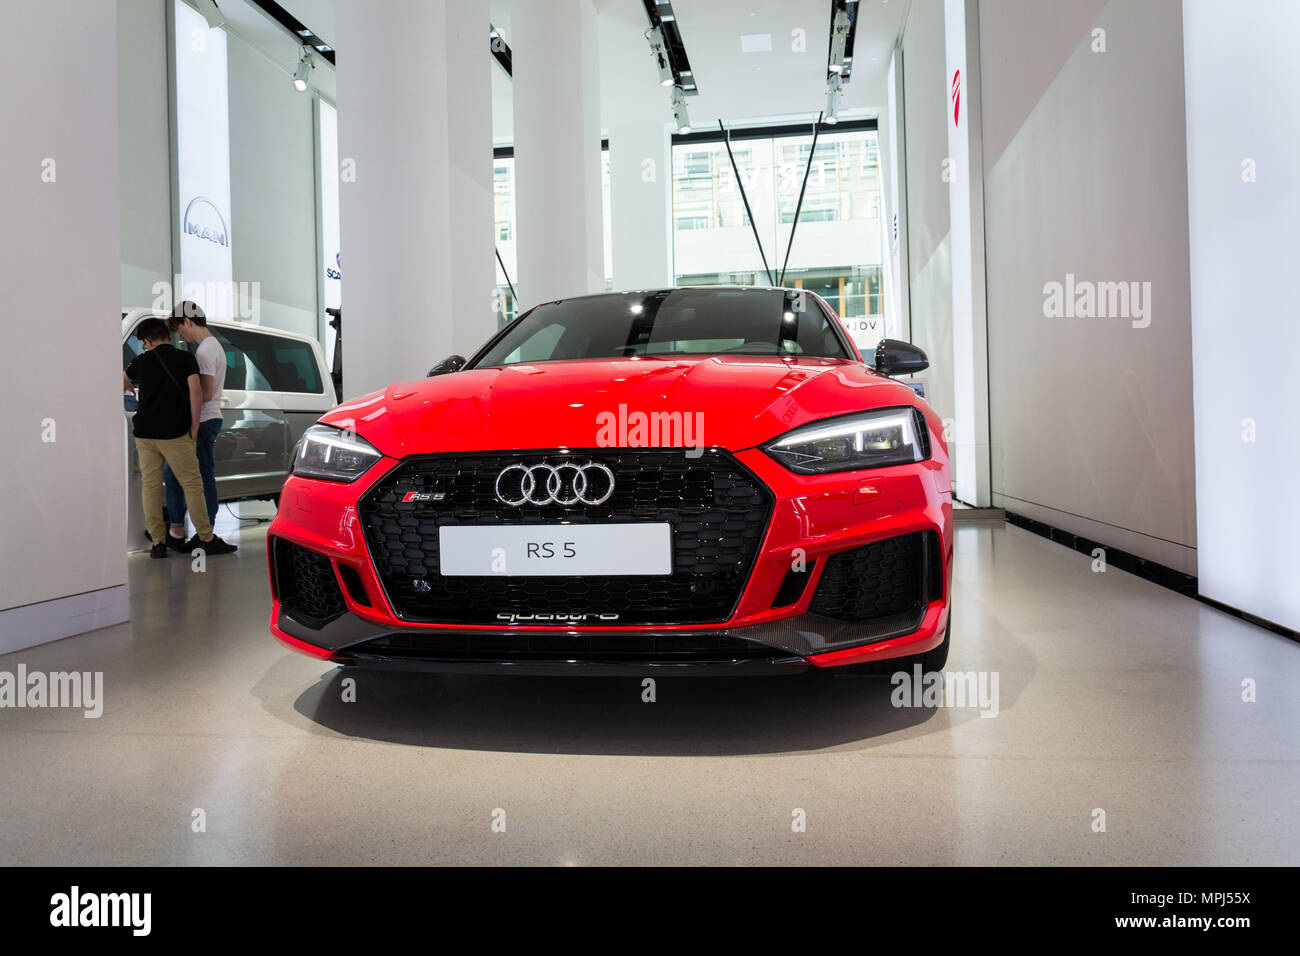 BERLIN, GERMANY - APRIL 15 2018: Audi company logo on Audi RS 5 car standing at Volkswagen Group forum Drive on April 15, 2018 in Berlin, Germany. Stock Photo